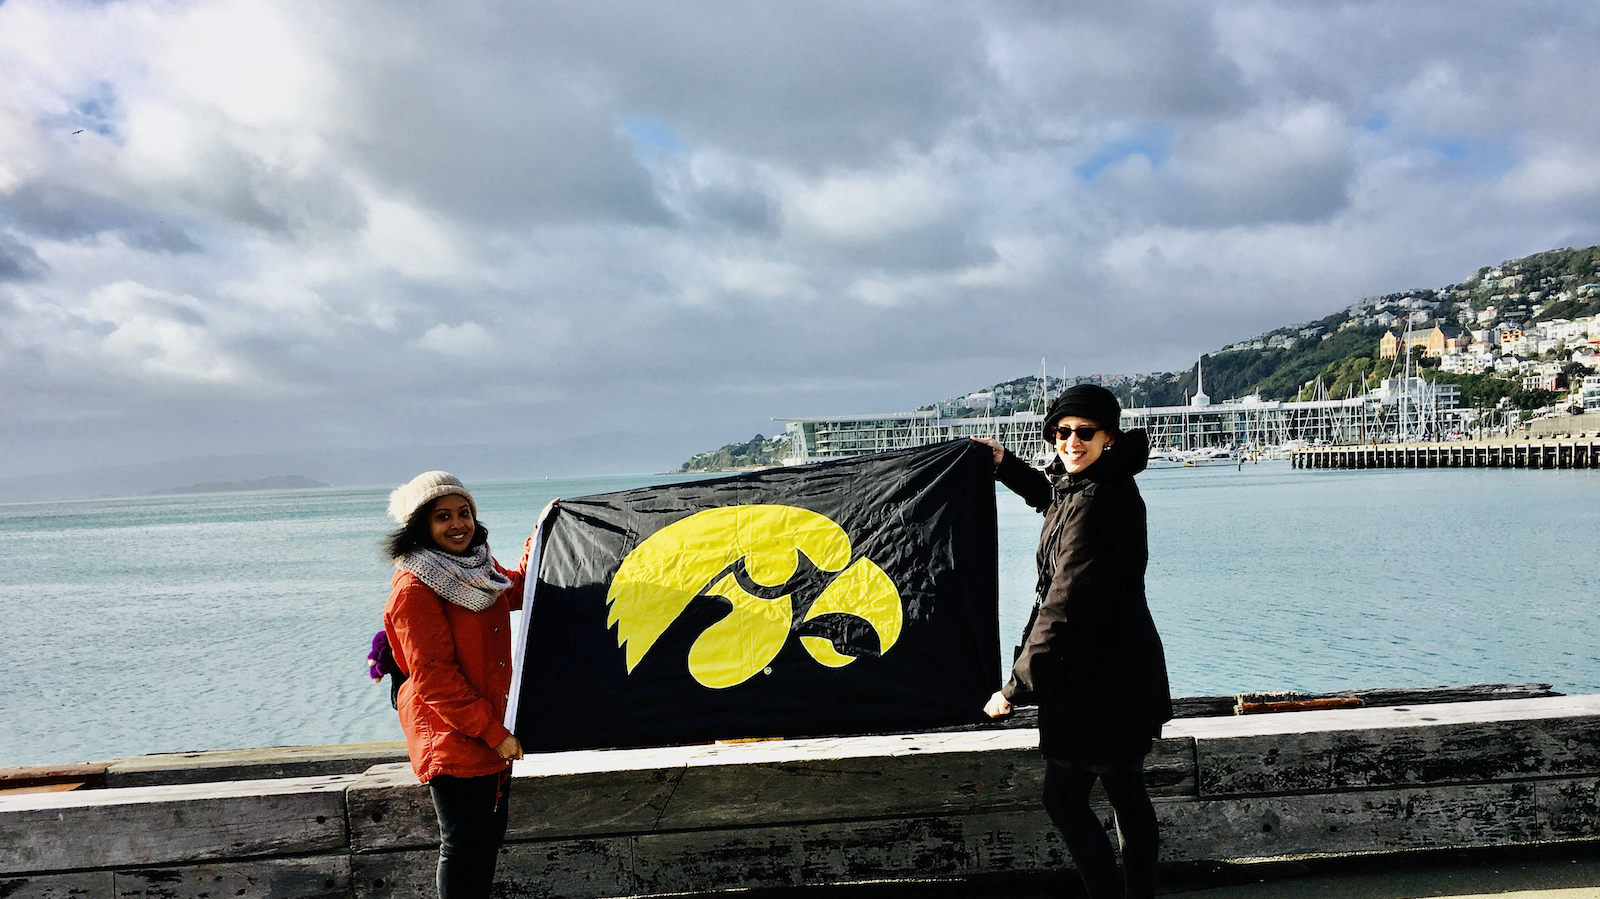 photo of Iowa students holding a University of Iowa flag on the waterfront in New Zealand.